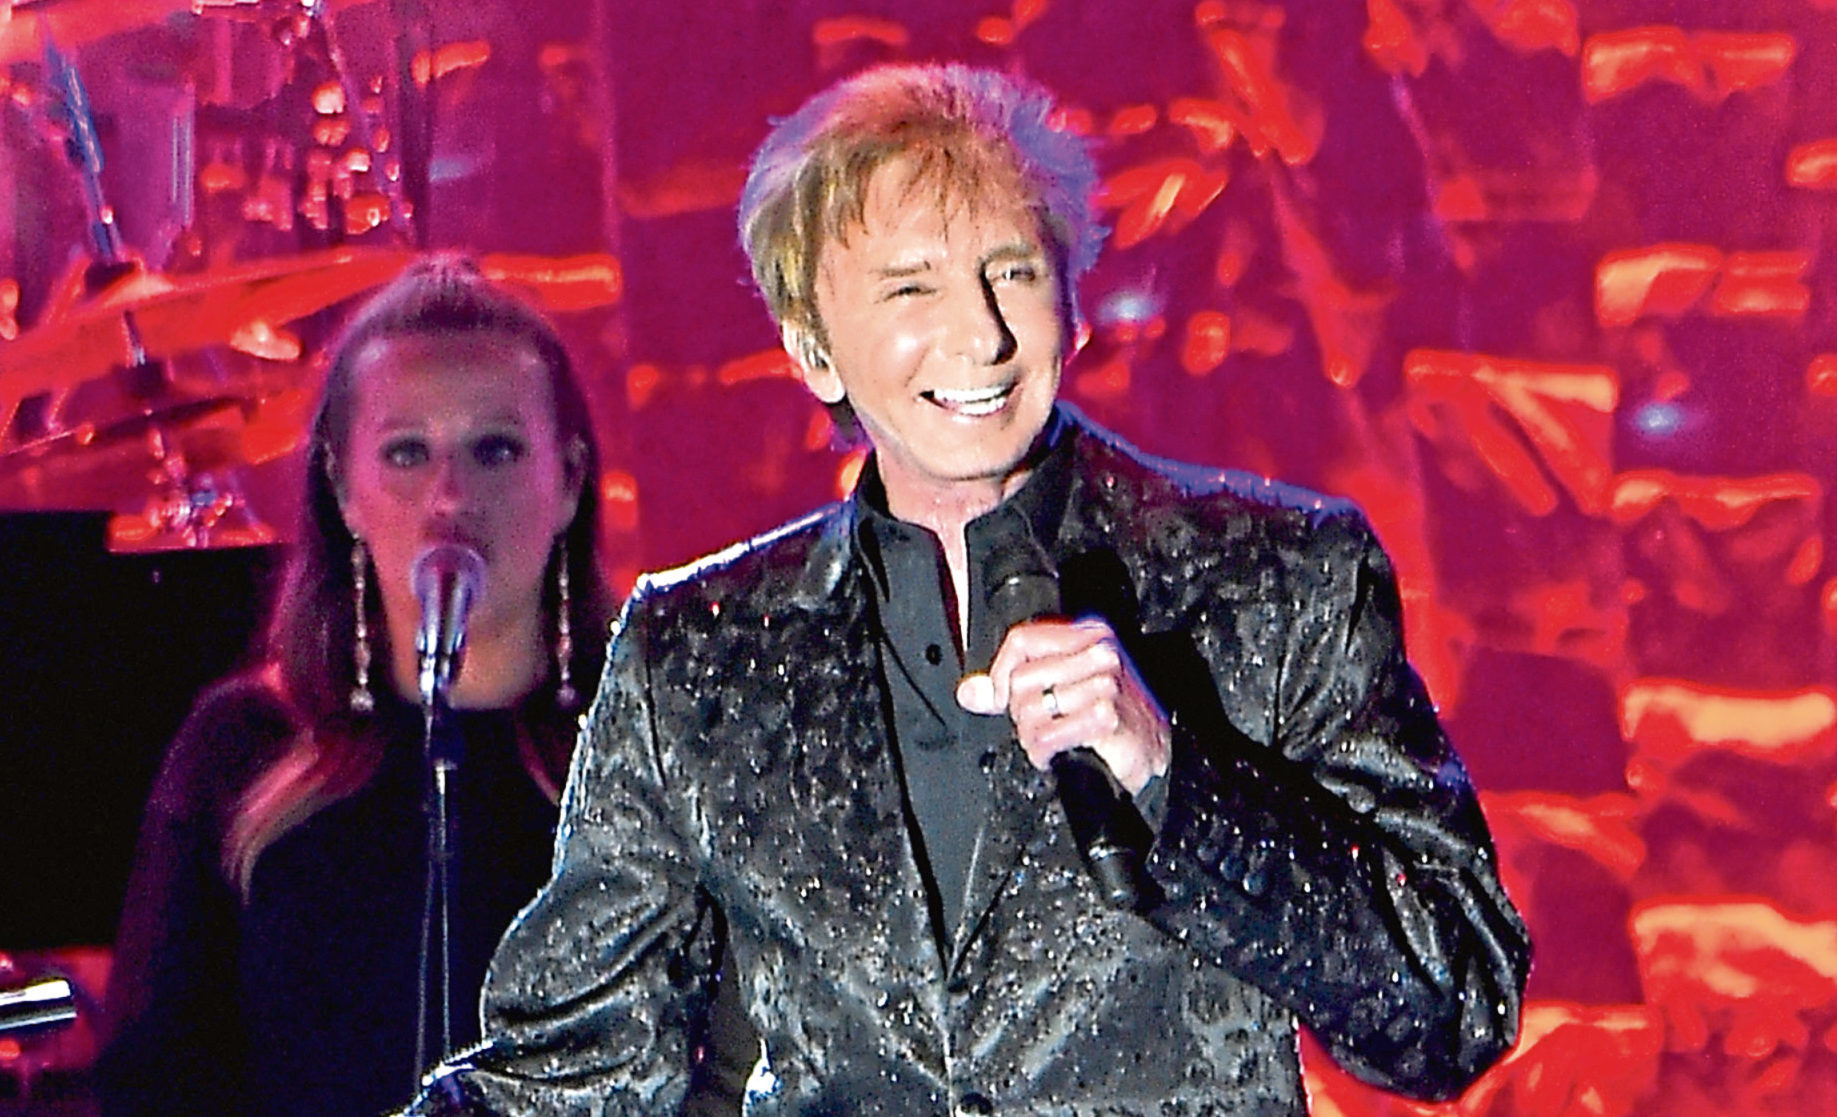 Barry Manilow ​performs at a celebrity event in January of this year in New York City (Mike Coppola / Getty Images)